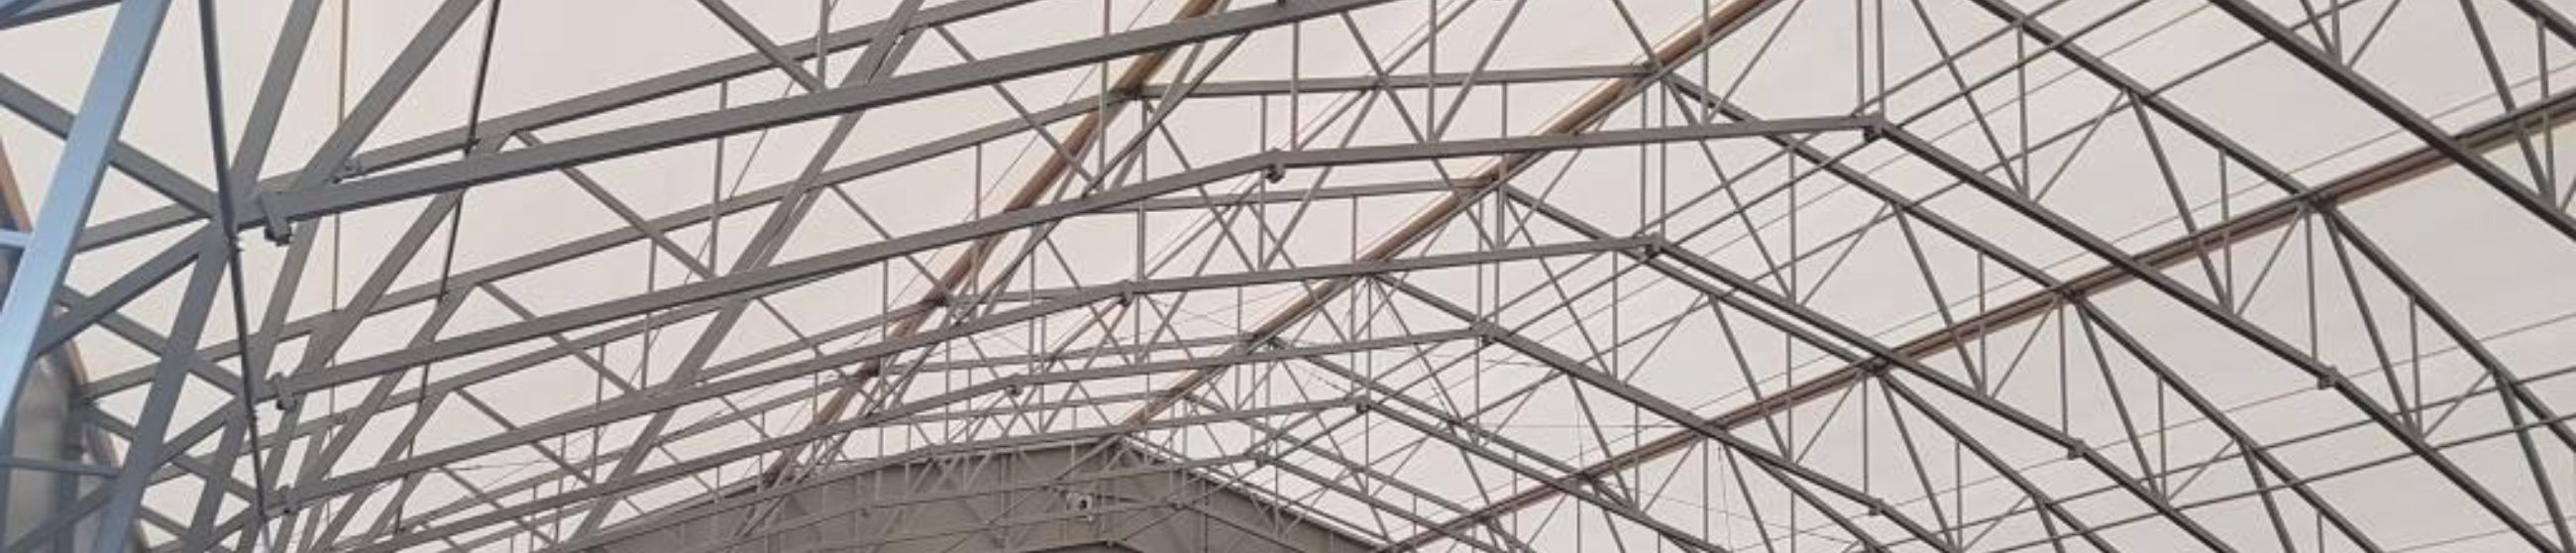 Warehouse curtains, pvc curtains, Tenthall, Construction, Construction, design of curtain solutions, Production, Installation work, Metal structures, pvc - hangars